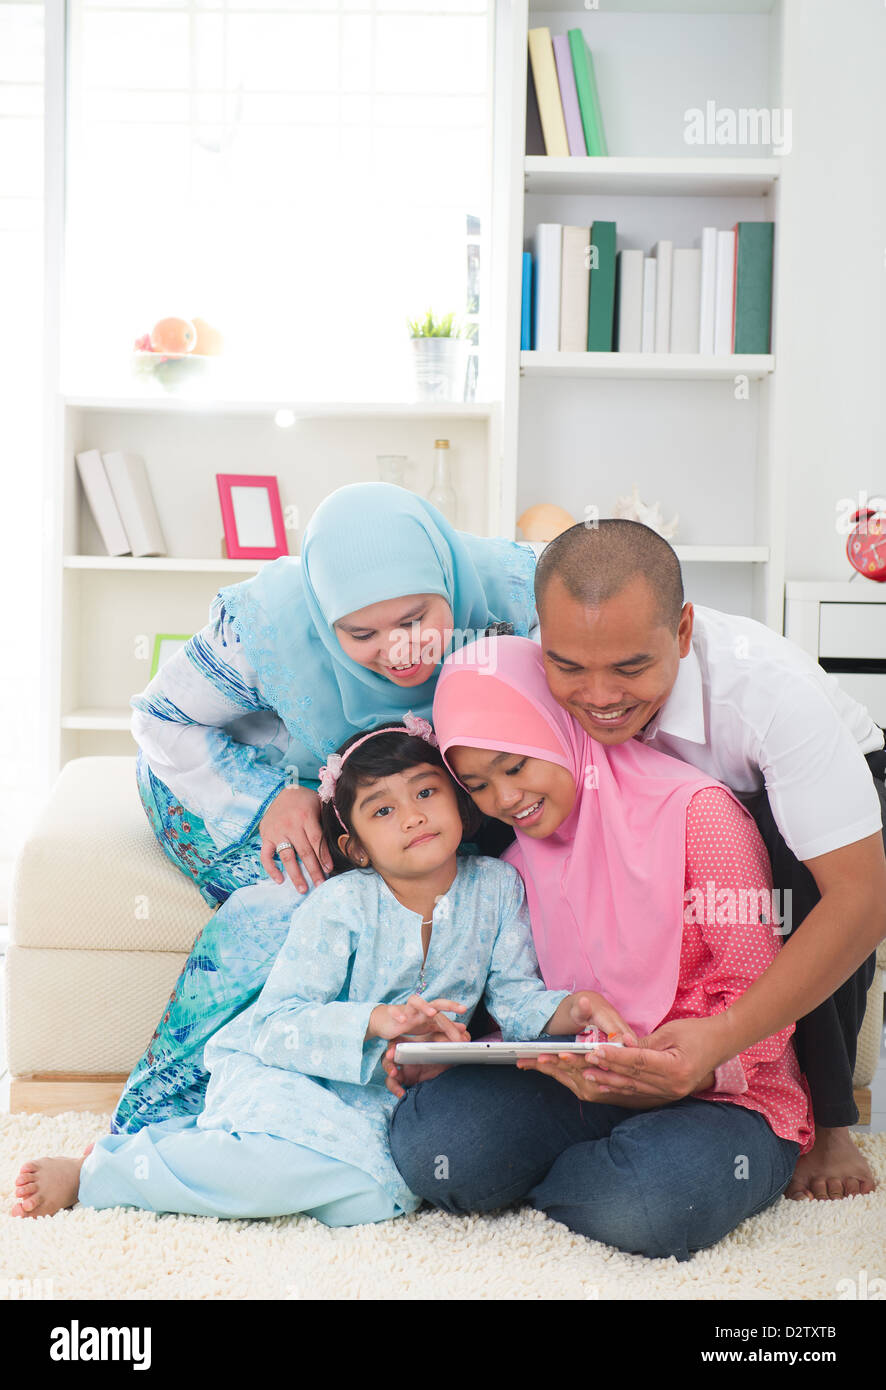 indonesian malay family having a good time surfing internet Stock Photo